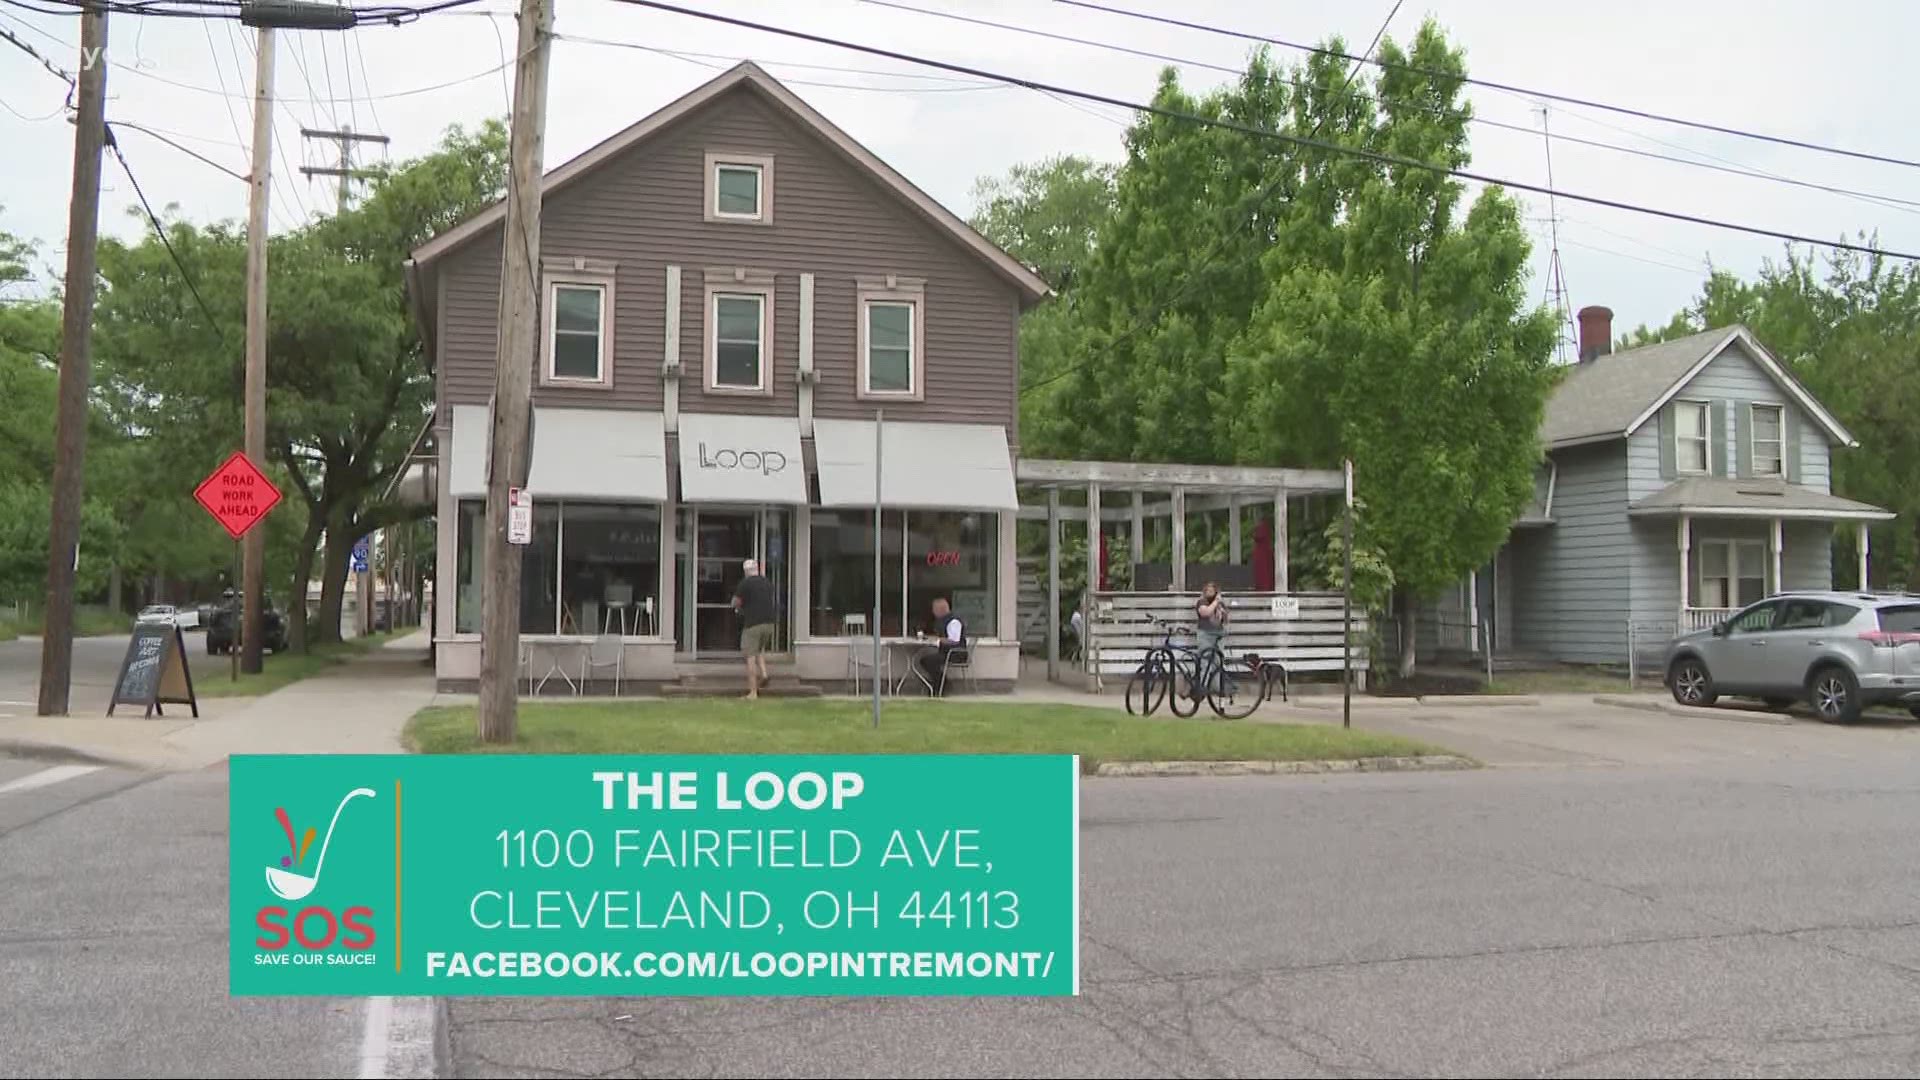 Looking for a good cup of coffee in Cleveland? Look no further than The Loop on Fairfield Avenue.